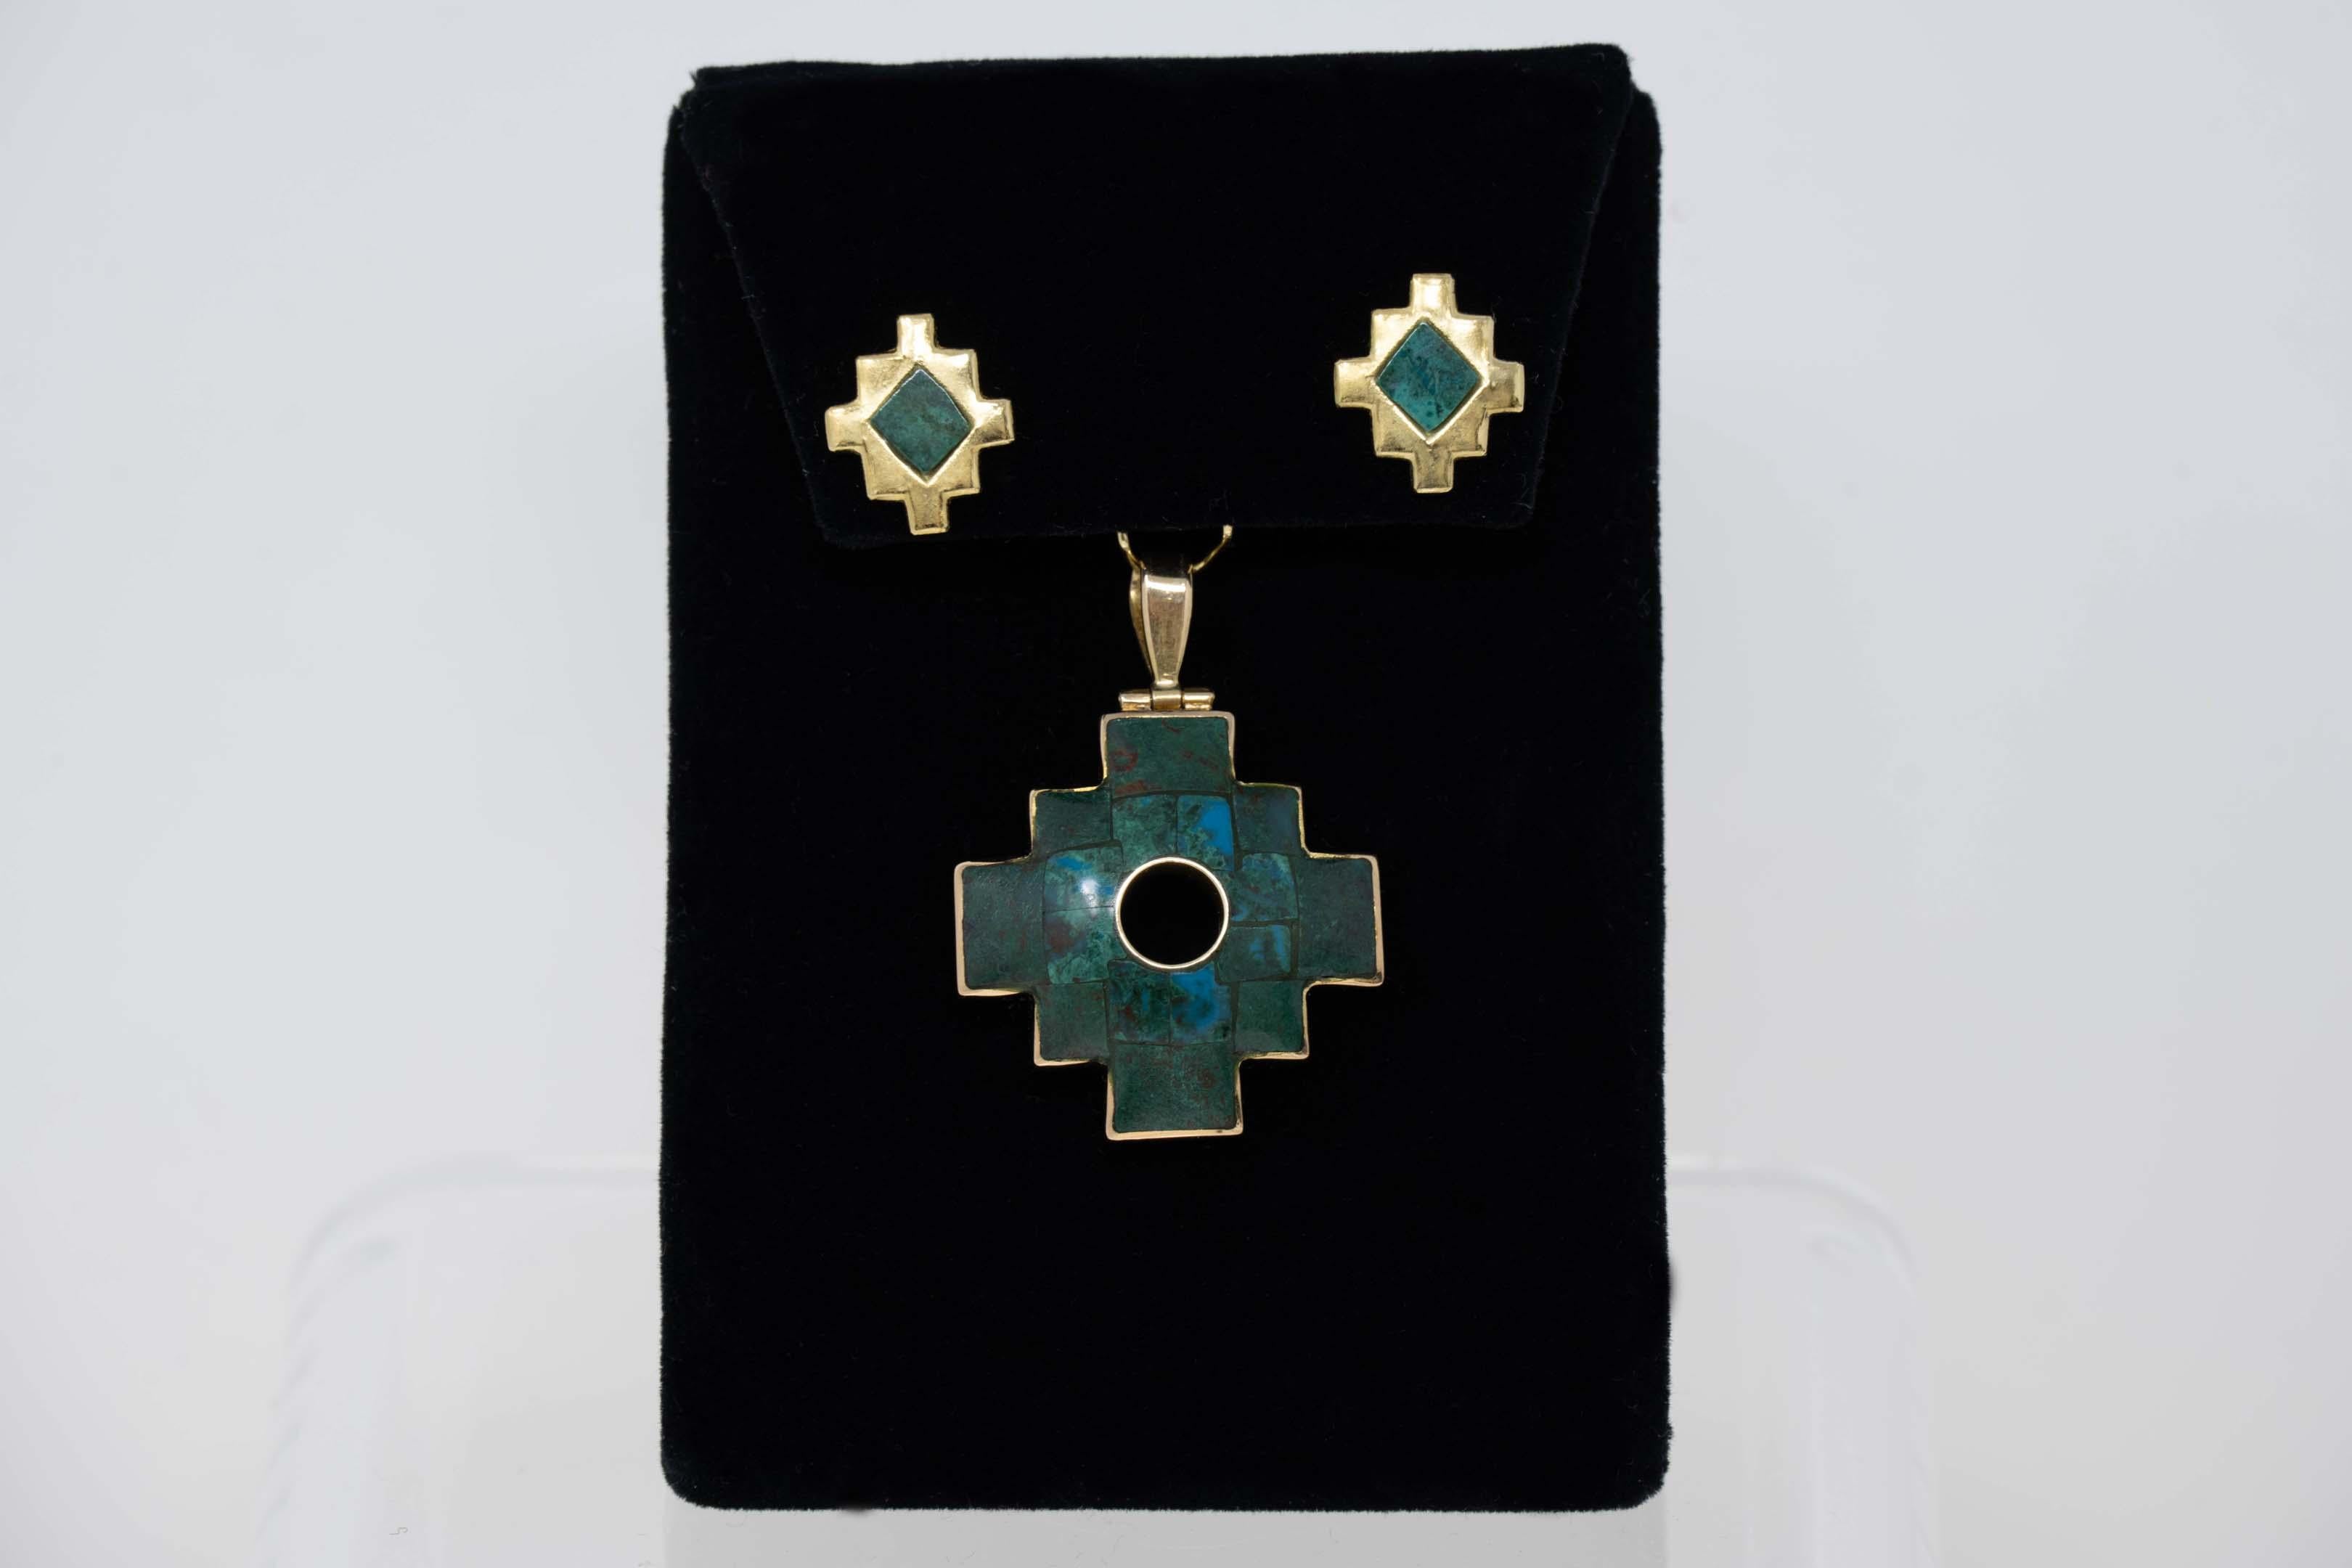 18k gold & malachite and turquoise central design gemstone pendant and earrings. Stamped 18k no maker mark. Measures 26mm x 26mm (Pendant) and earrings 12mm x 13mm, 11.7 grams. In good condition.
